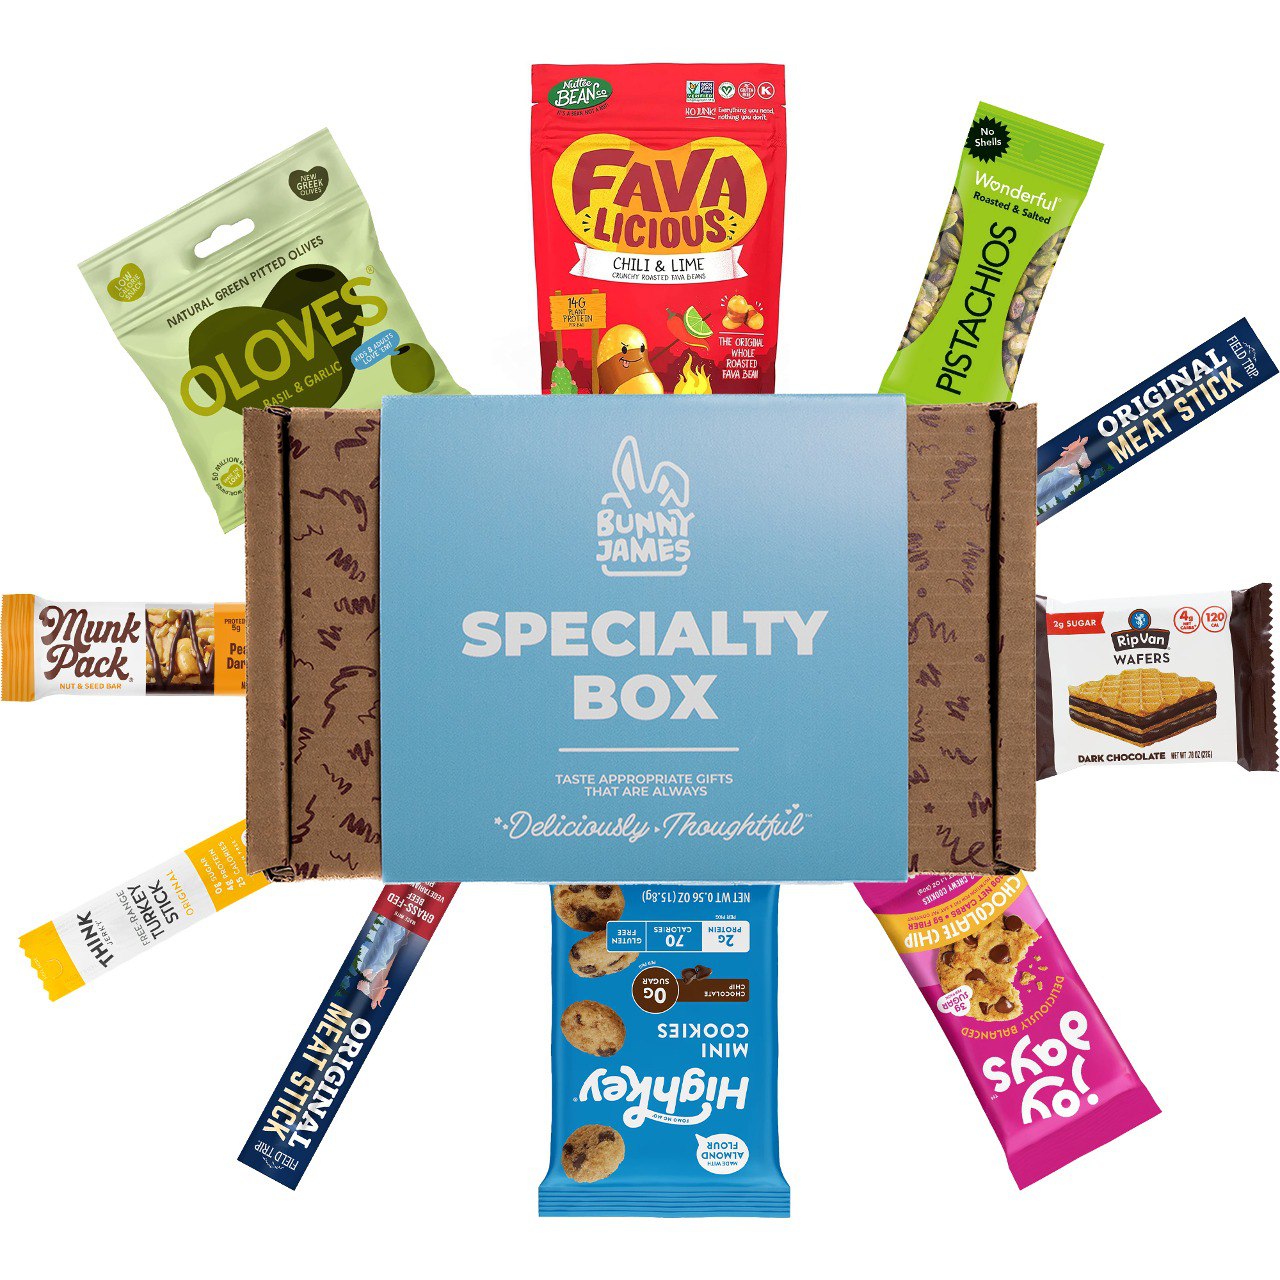 Diabetic Friendly Snack Box - Delicious & Healthy Snacks for On-the-Go